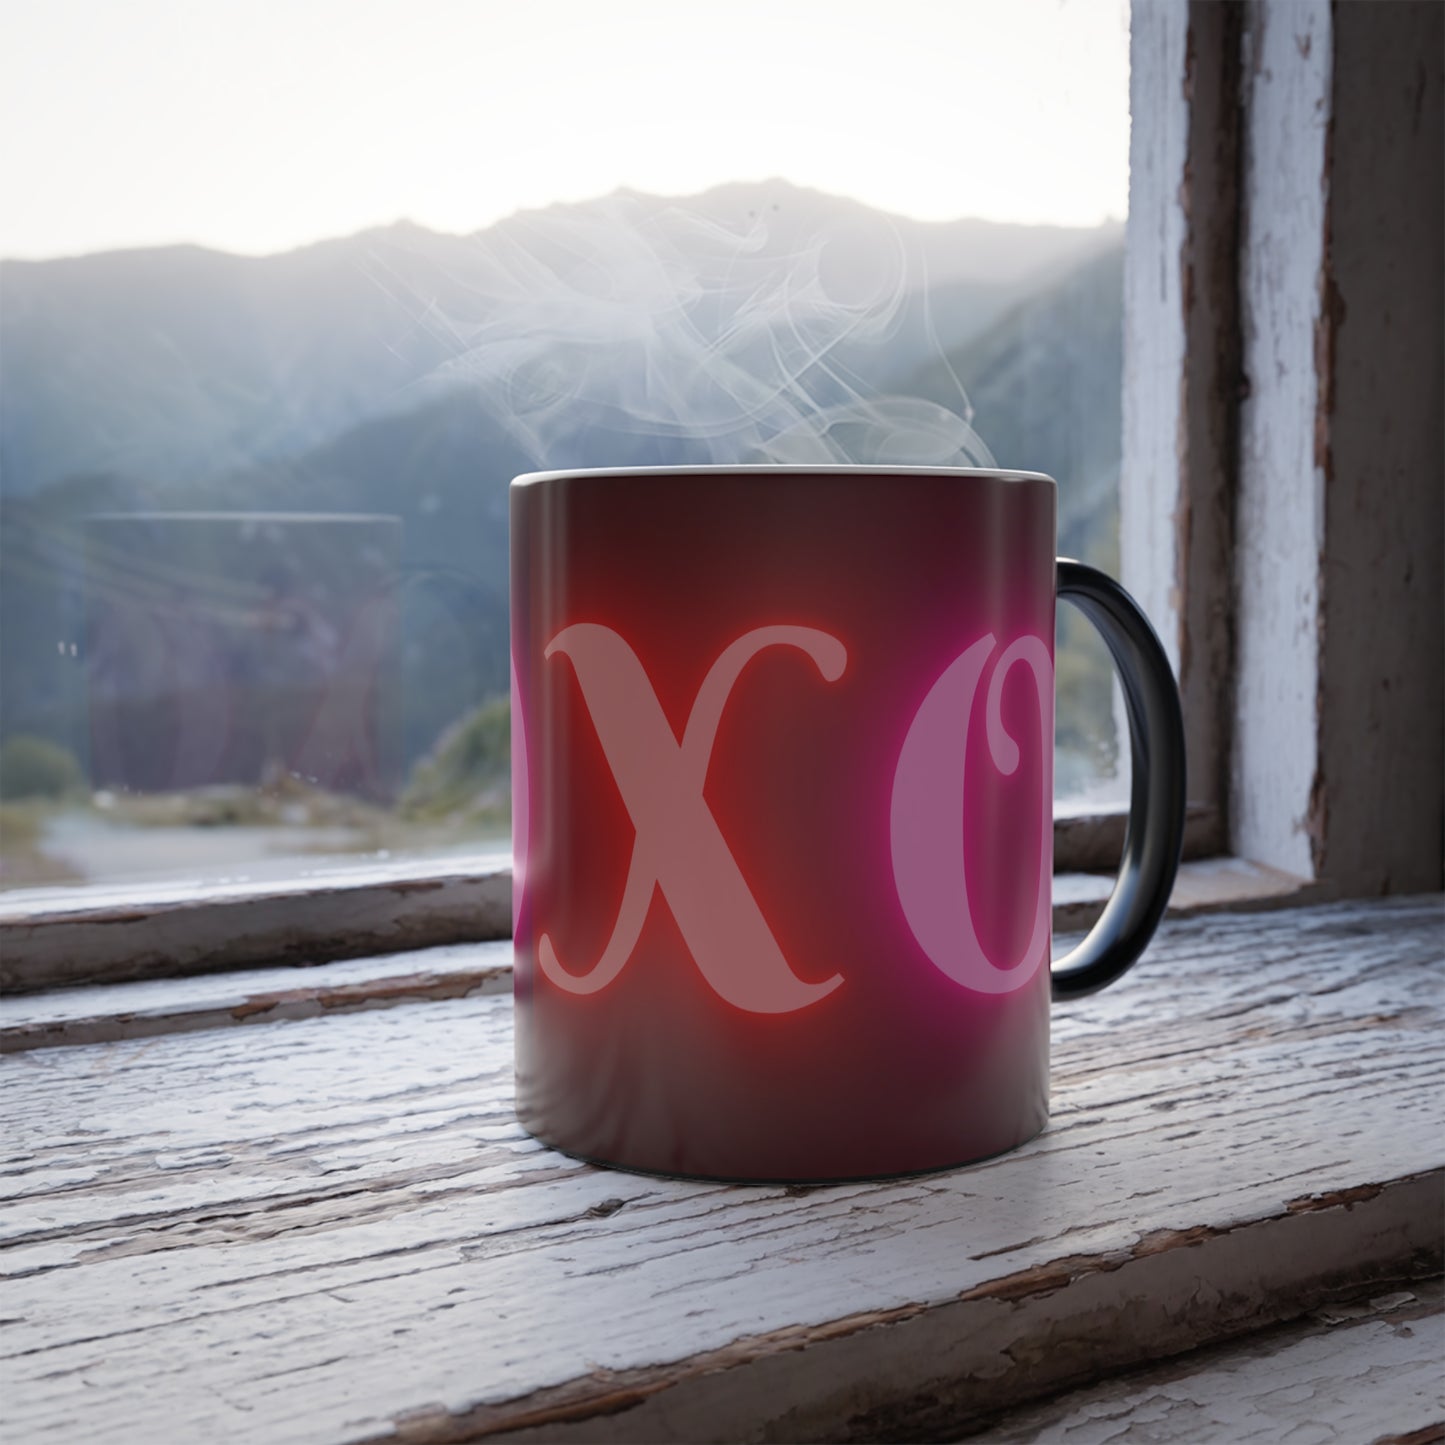 XoXo, Color Morphing Mug, 11oz, Valentines Day Gift, Gift For Her, Gift For Him